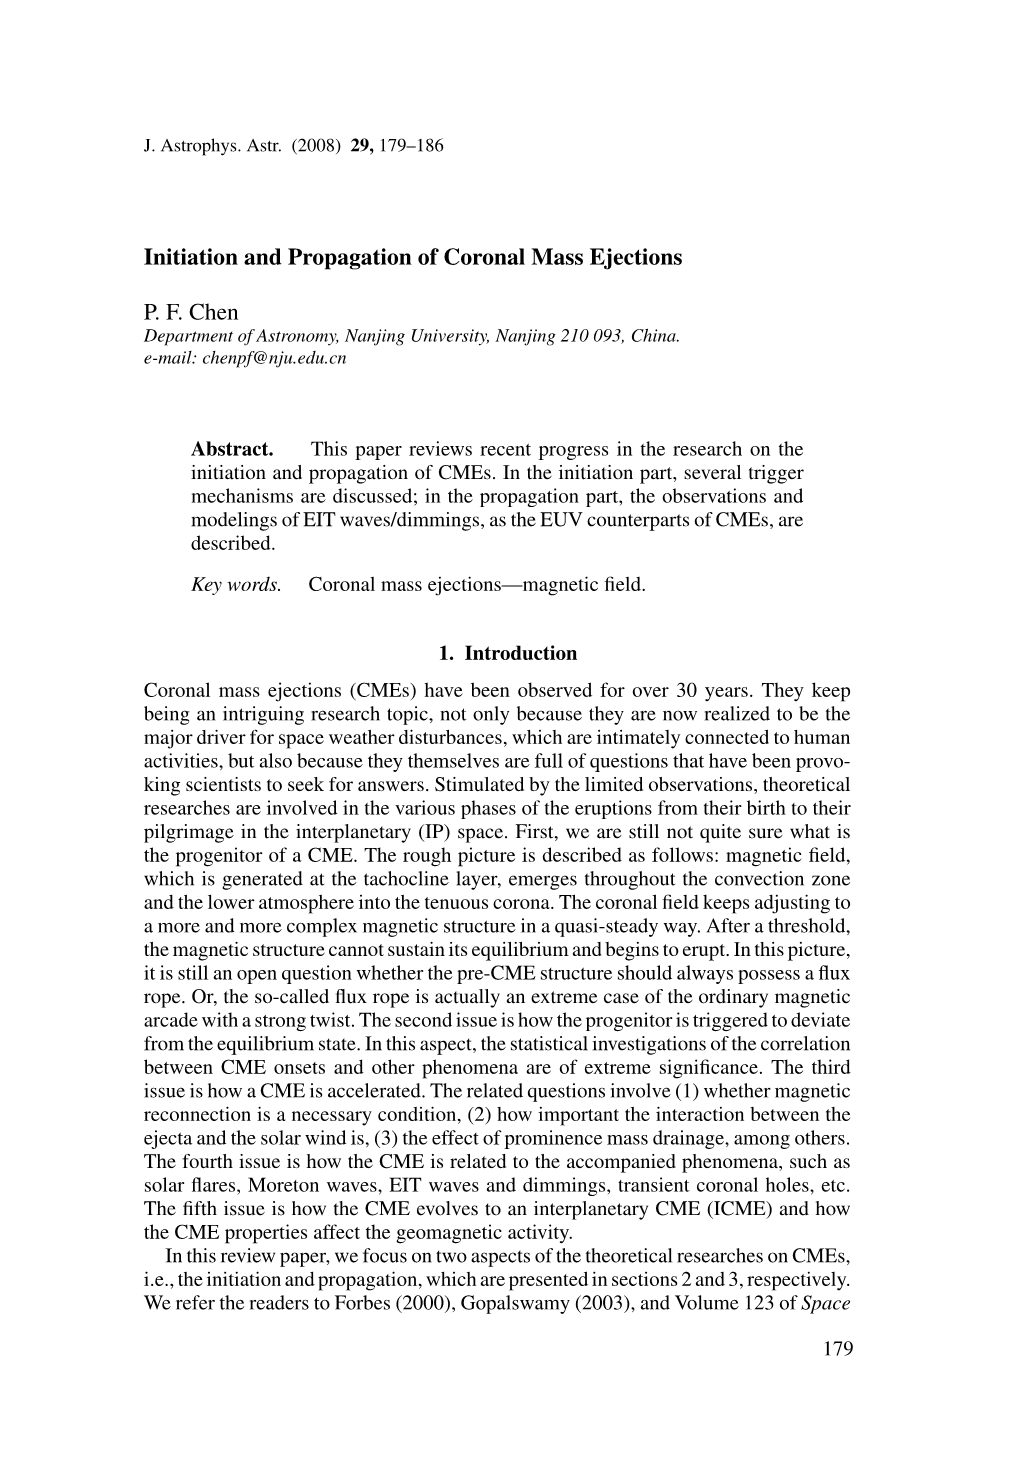 Initiation and Propagation of Coronal Mass Ejections P. F. Chen